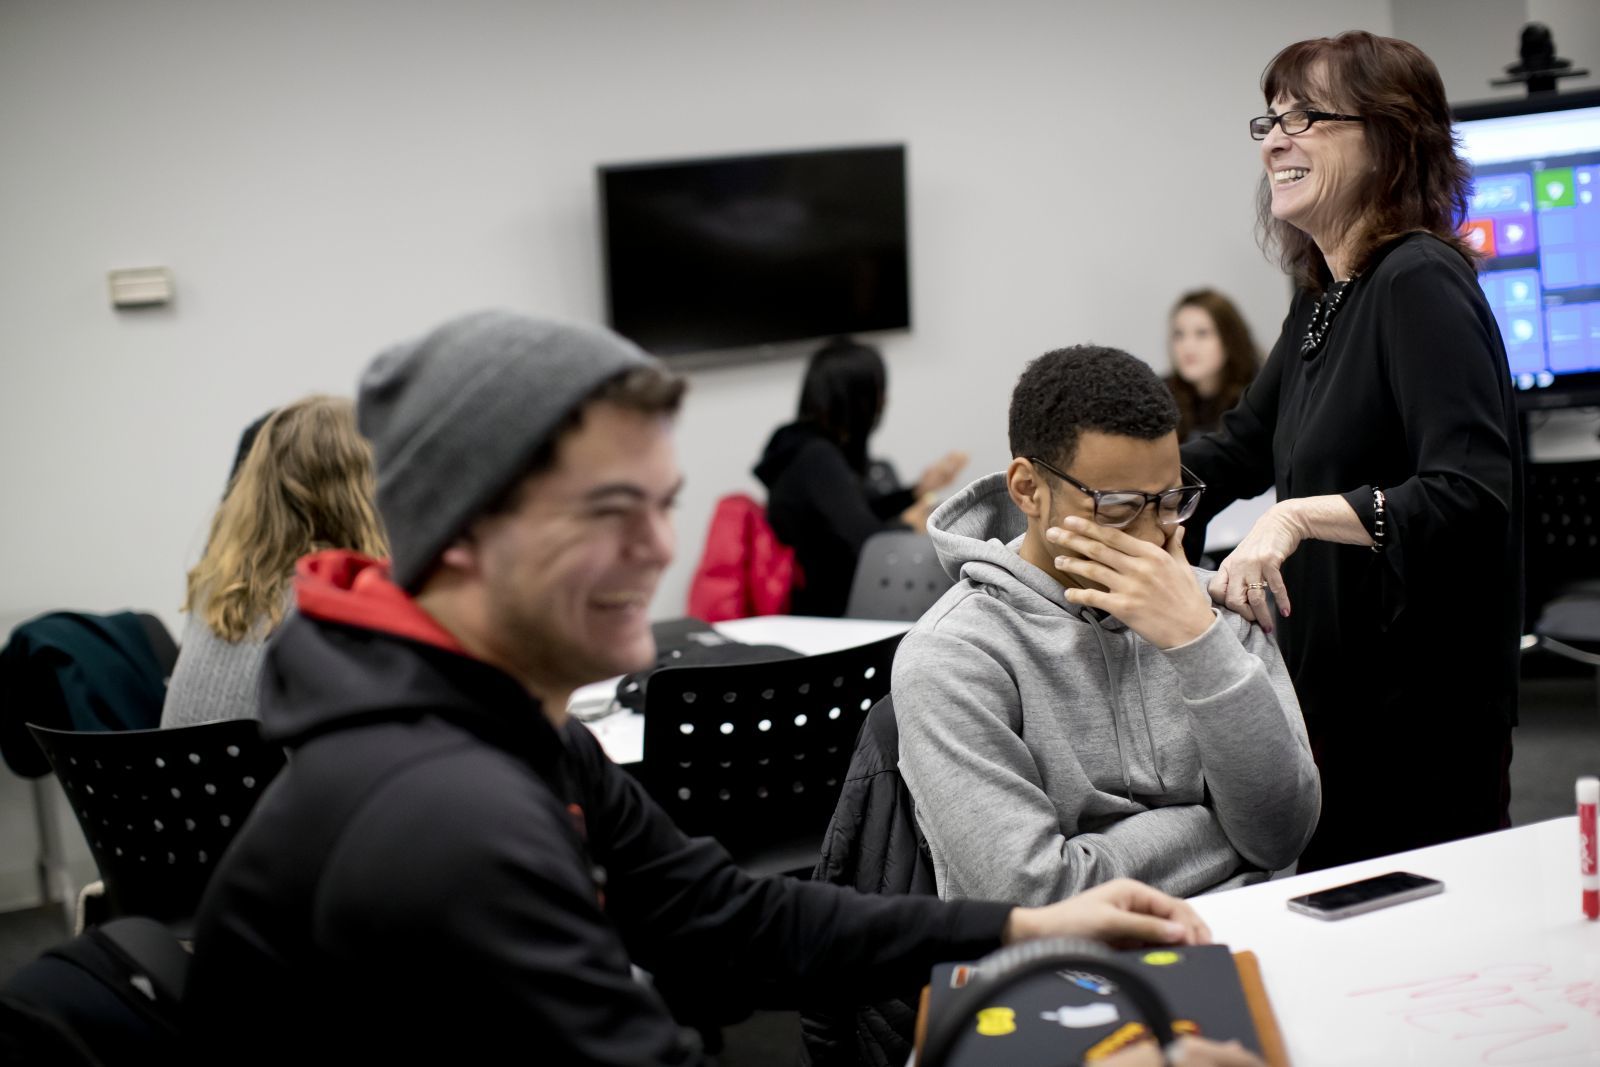 Students in a classroom laughing.